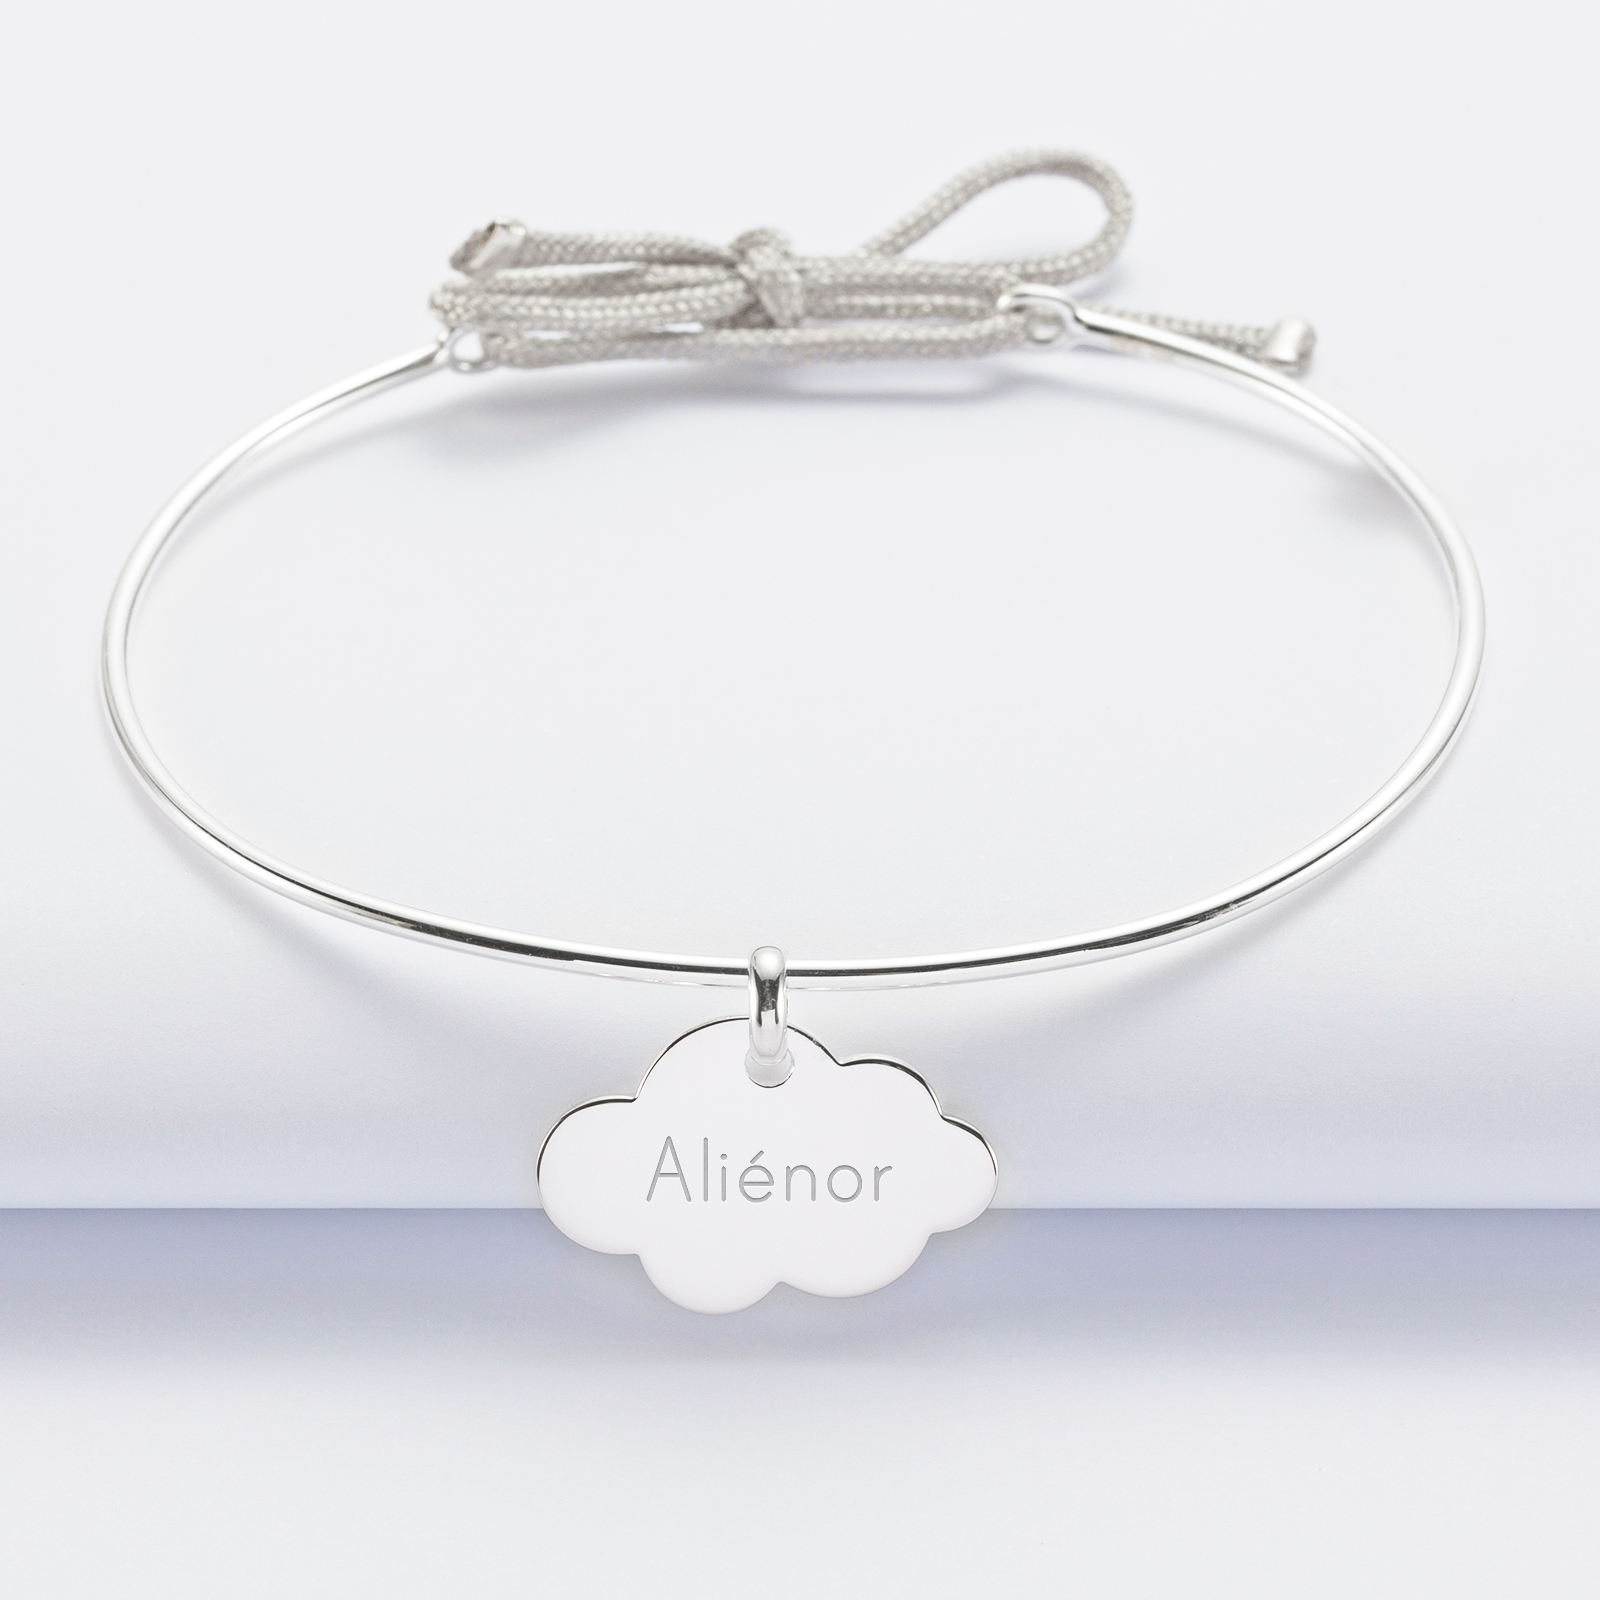 Personalised silver and cord bangle bracelet and engraved cloud medallion 20x14 mm - name 1